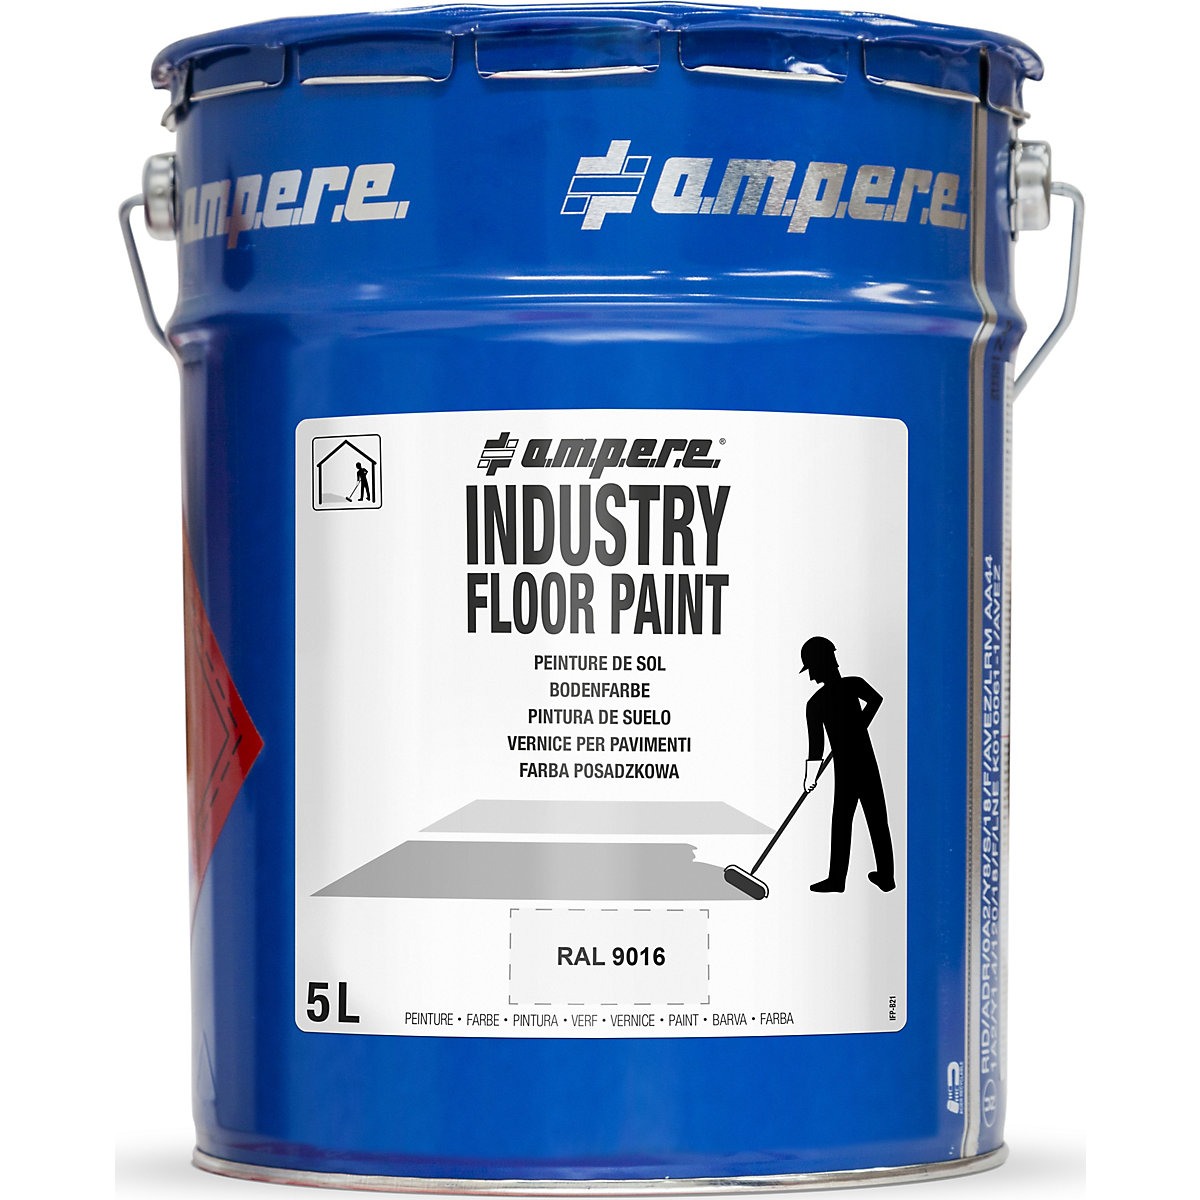 Industry Floor Paint® ground marking paint – Ampere, capacity 5 l, white-2